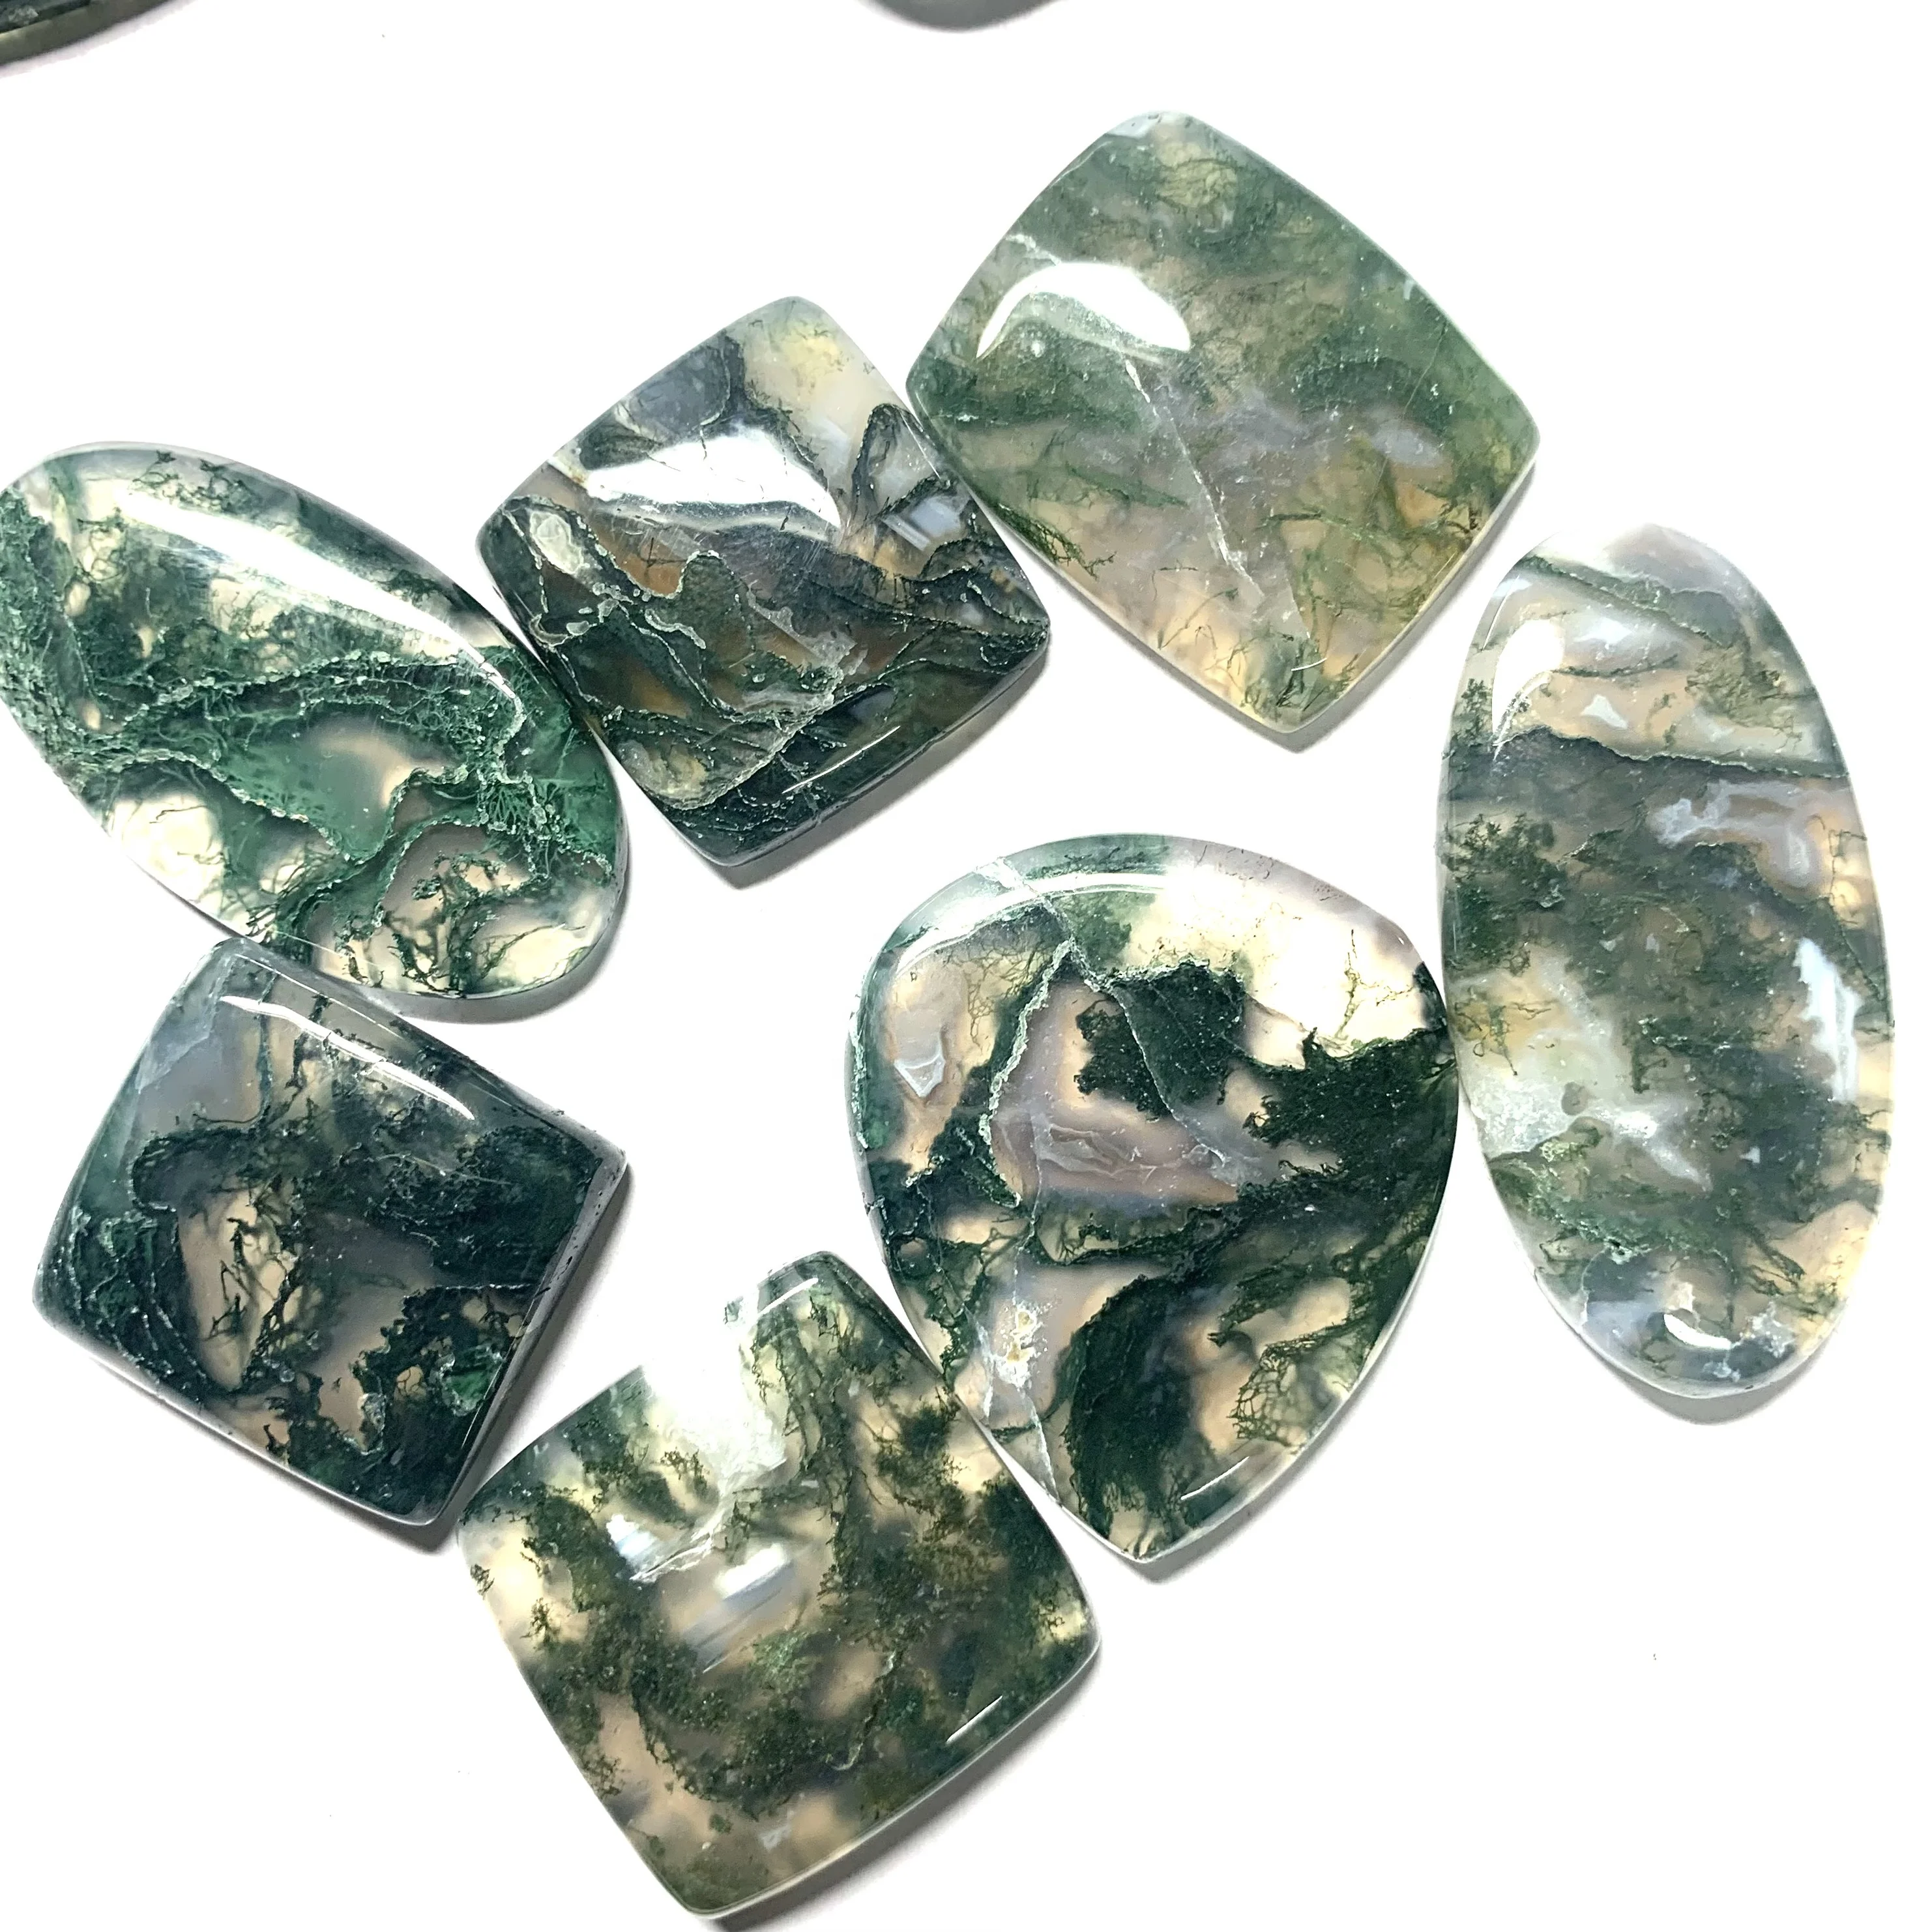 100% Natural Translucent Green Moss Agate Mix Cabochon Loose Gemstone ~Wholesale 